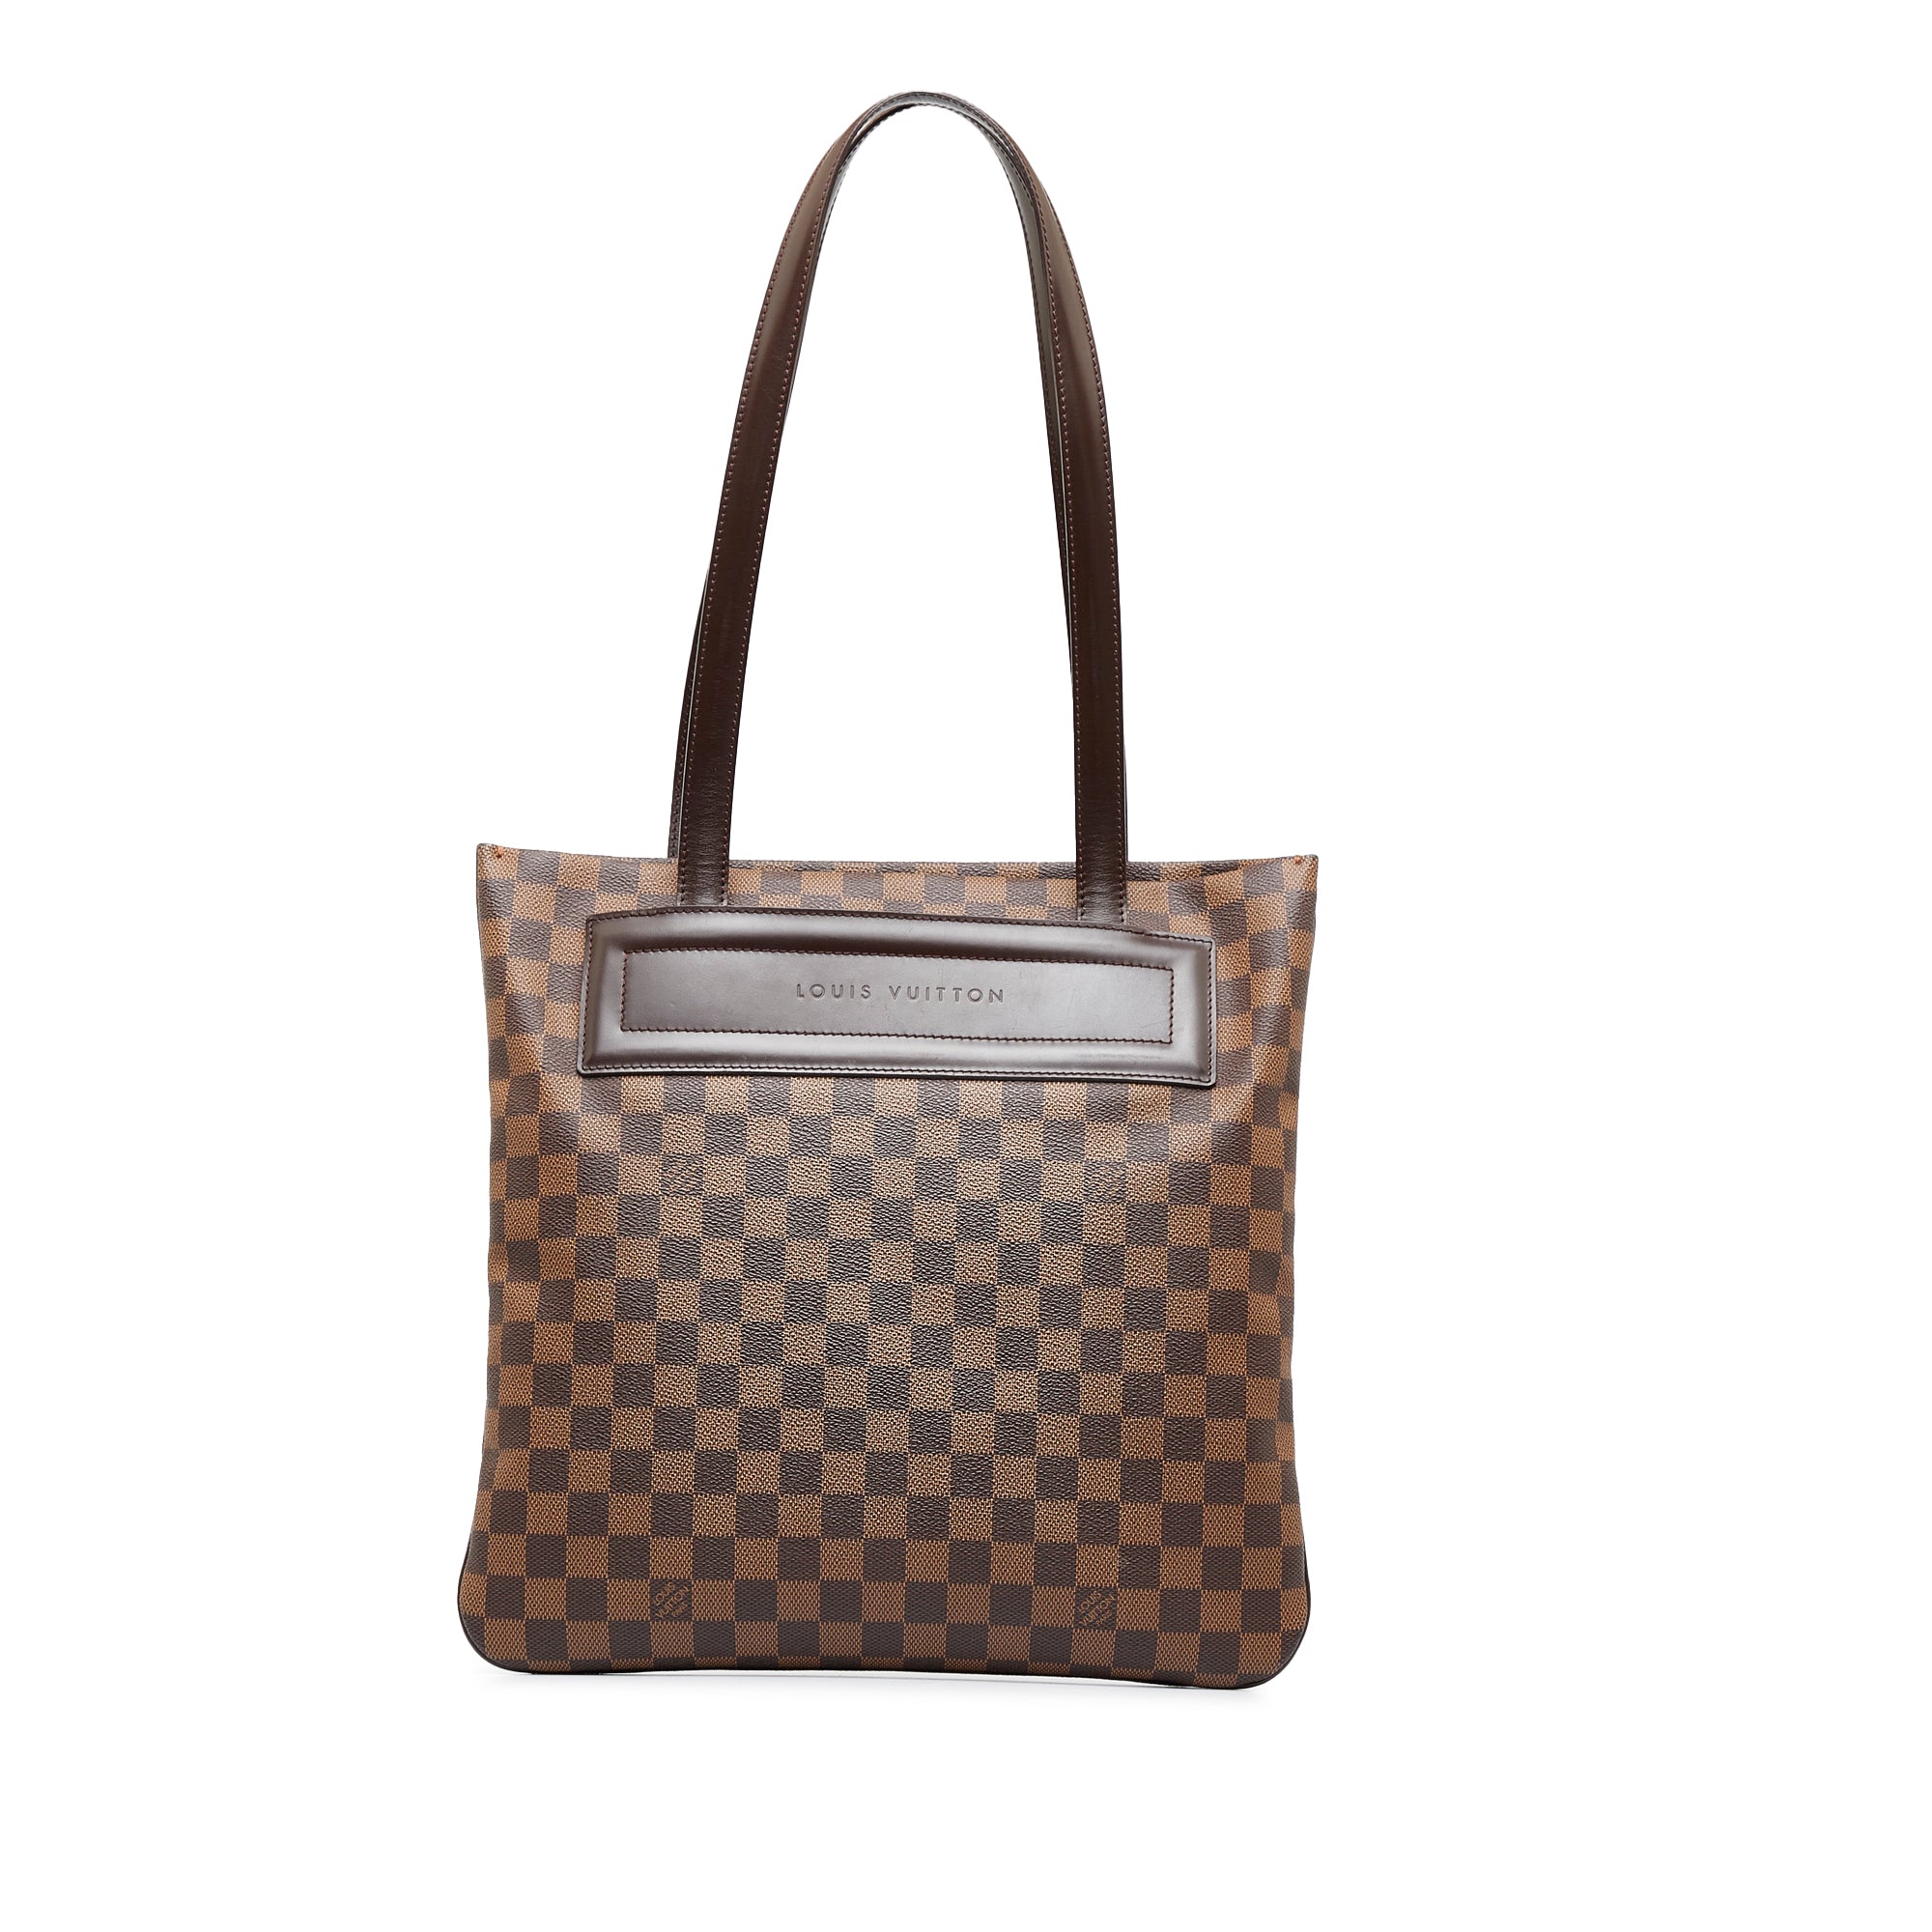 Louis Vuitton Bags & Handbags for Women for sale, Shop with Afterpay